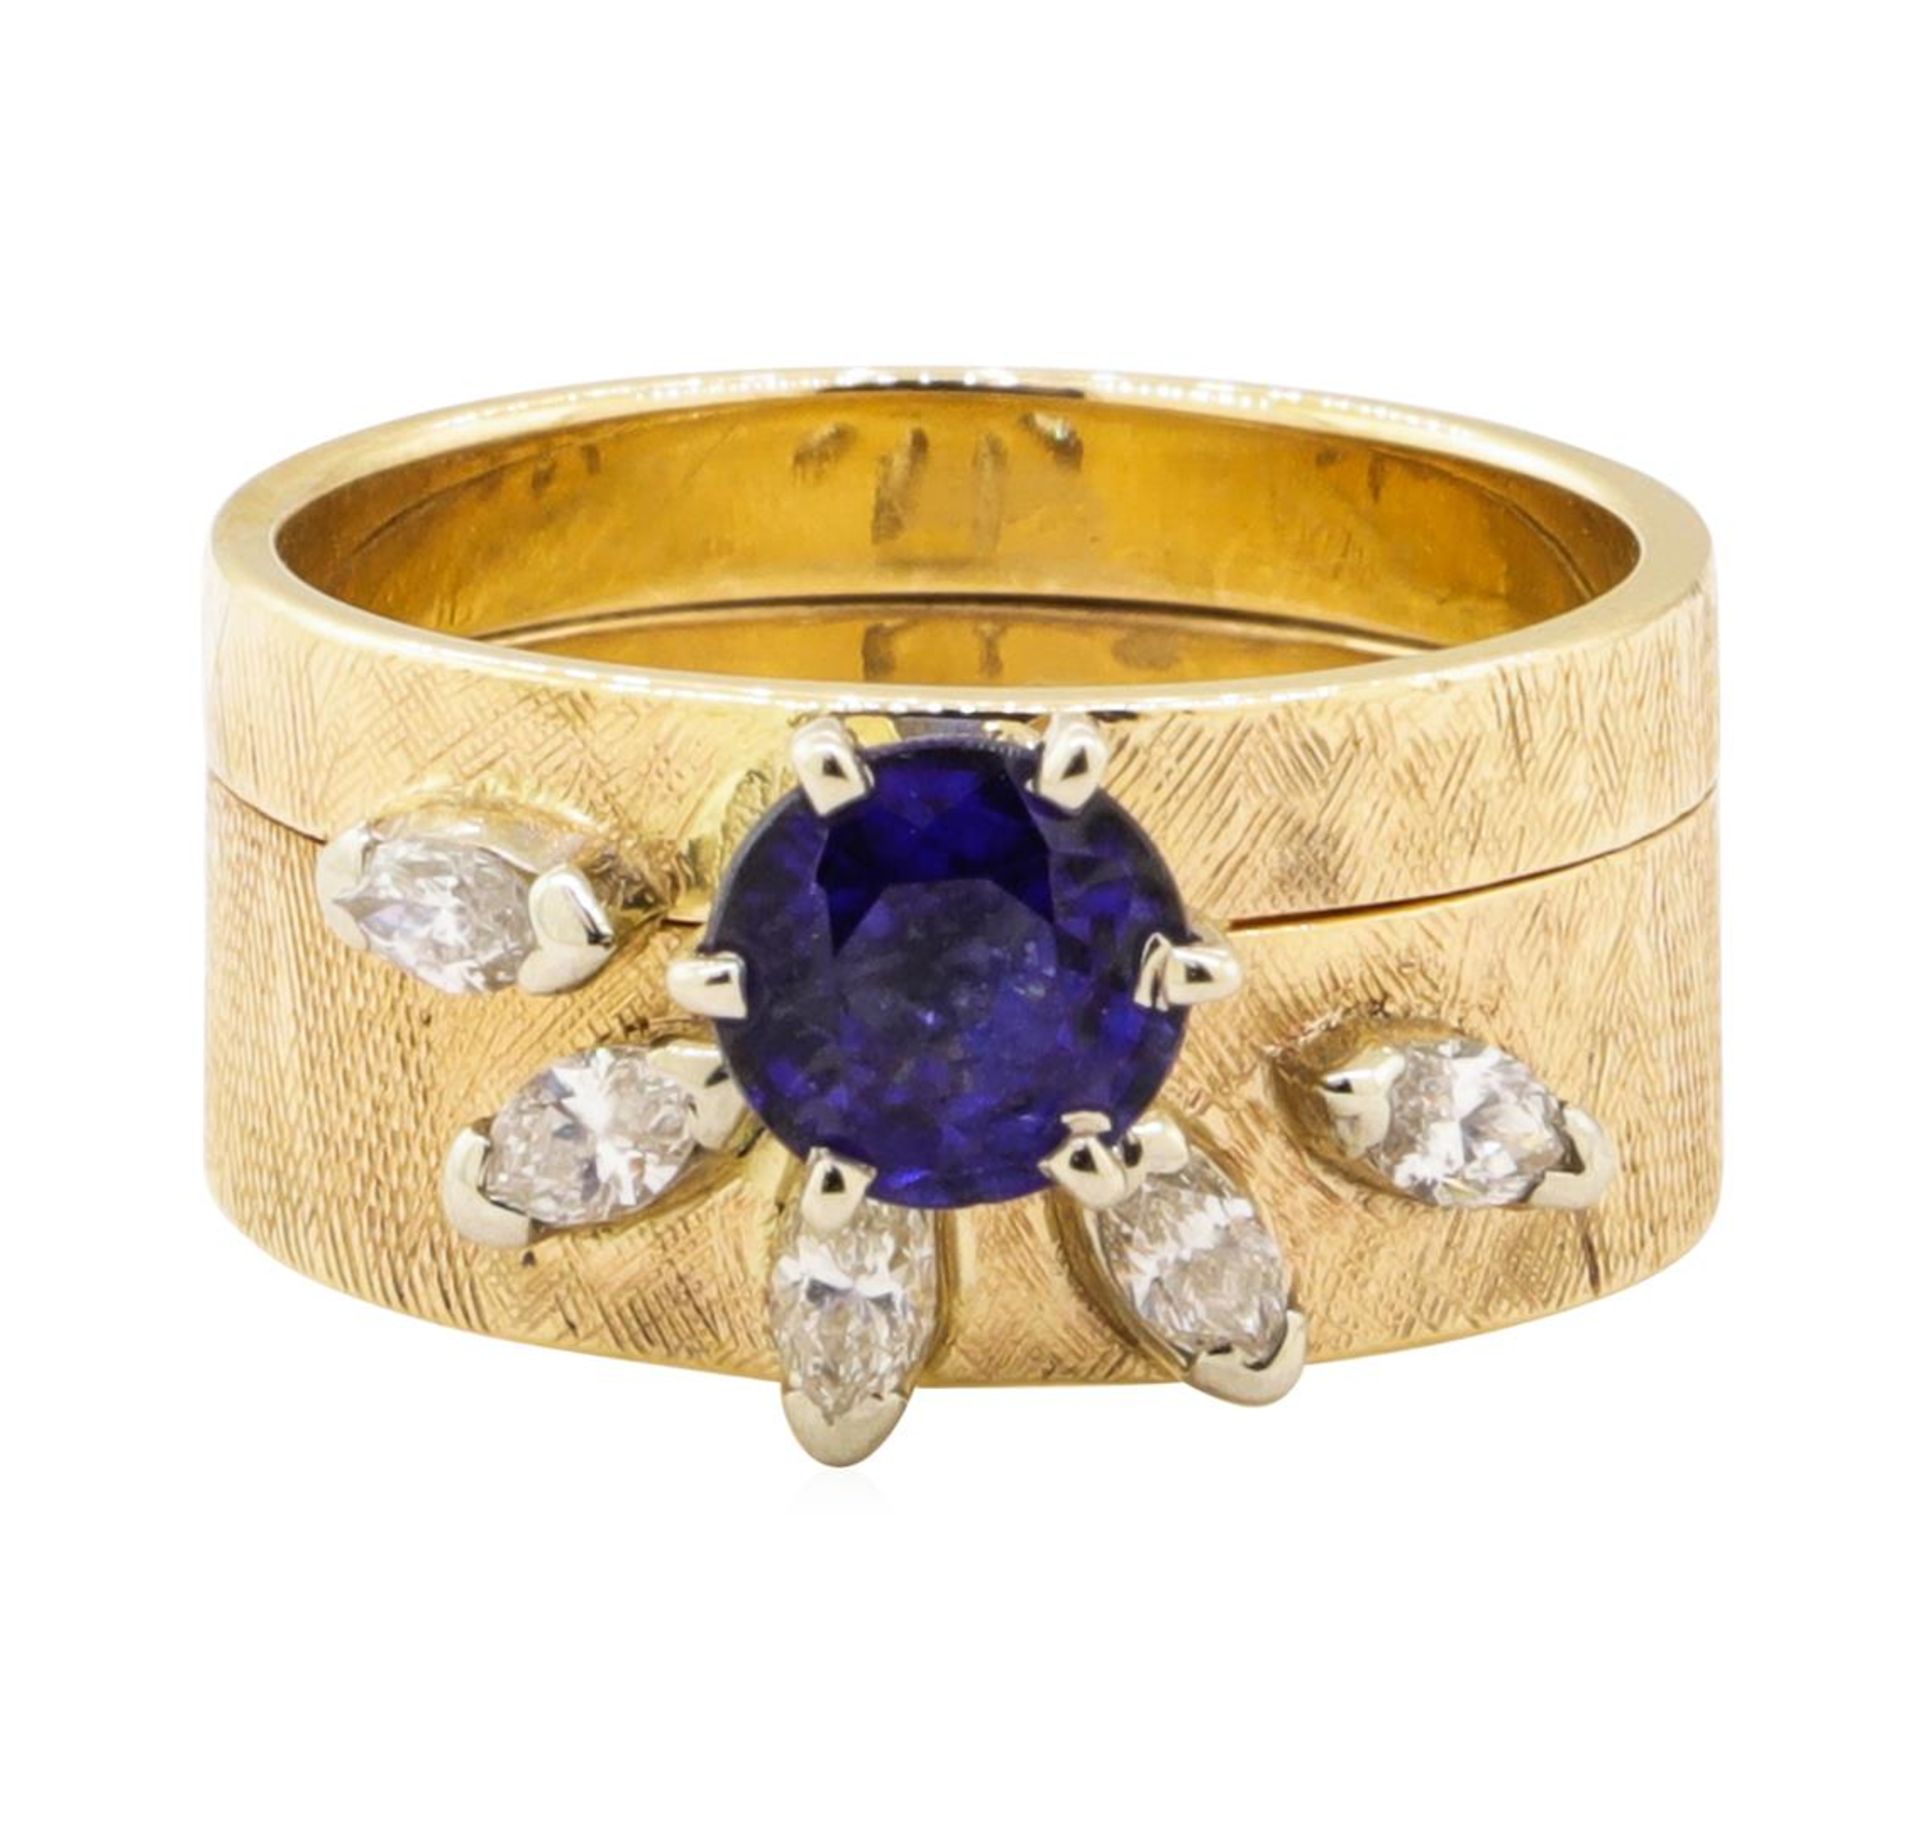 1.40 ctw Blue Sapphire and Diamond Ring - 14KT Yellow Gold - Image 2 of 4